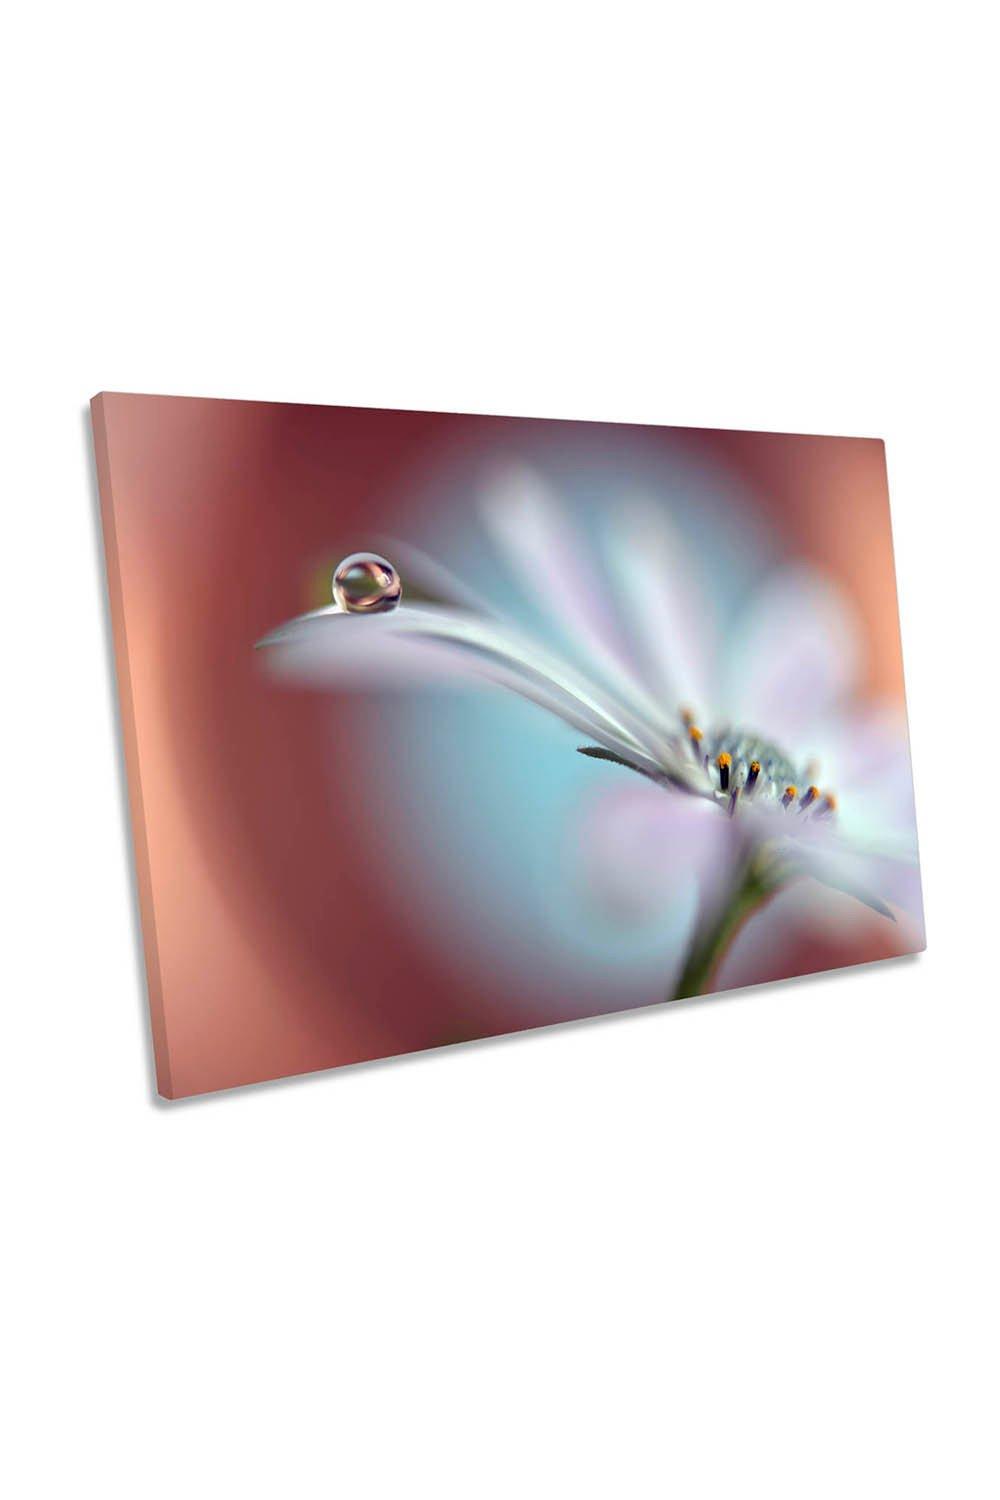 Summer Dream Water Drop White Flower Canvas Wall Art Picture Print